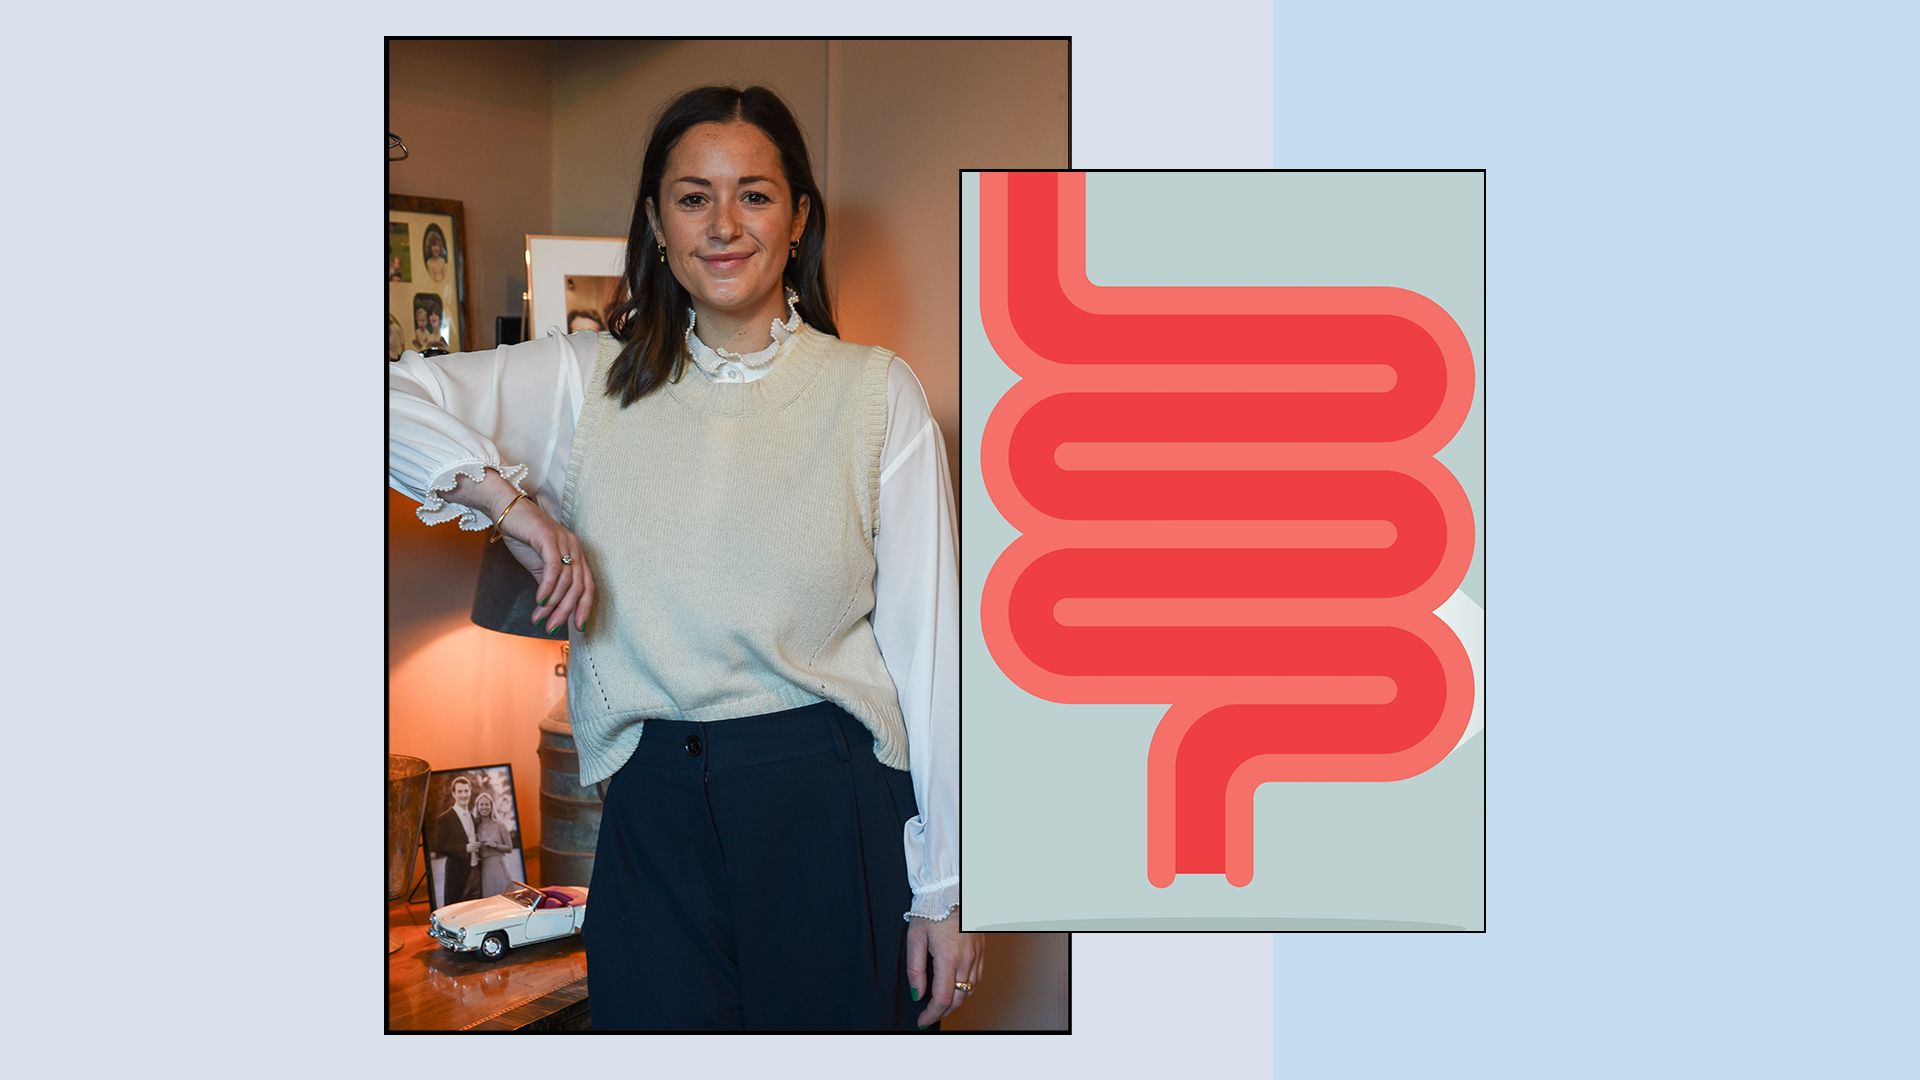 Split screen photo of a woman and an illustration of a colon